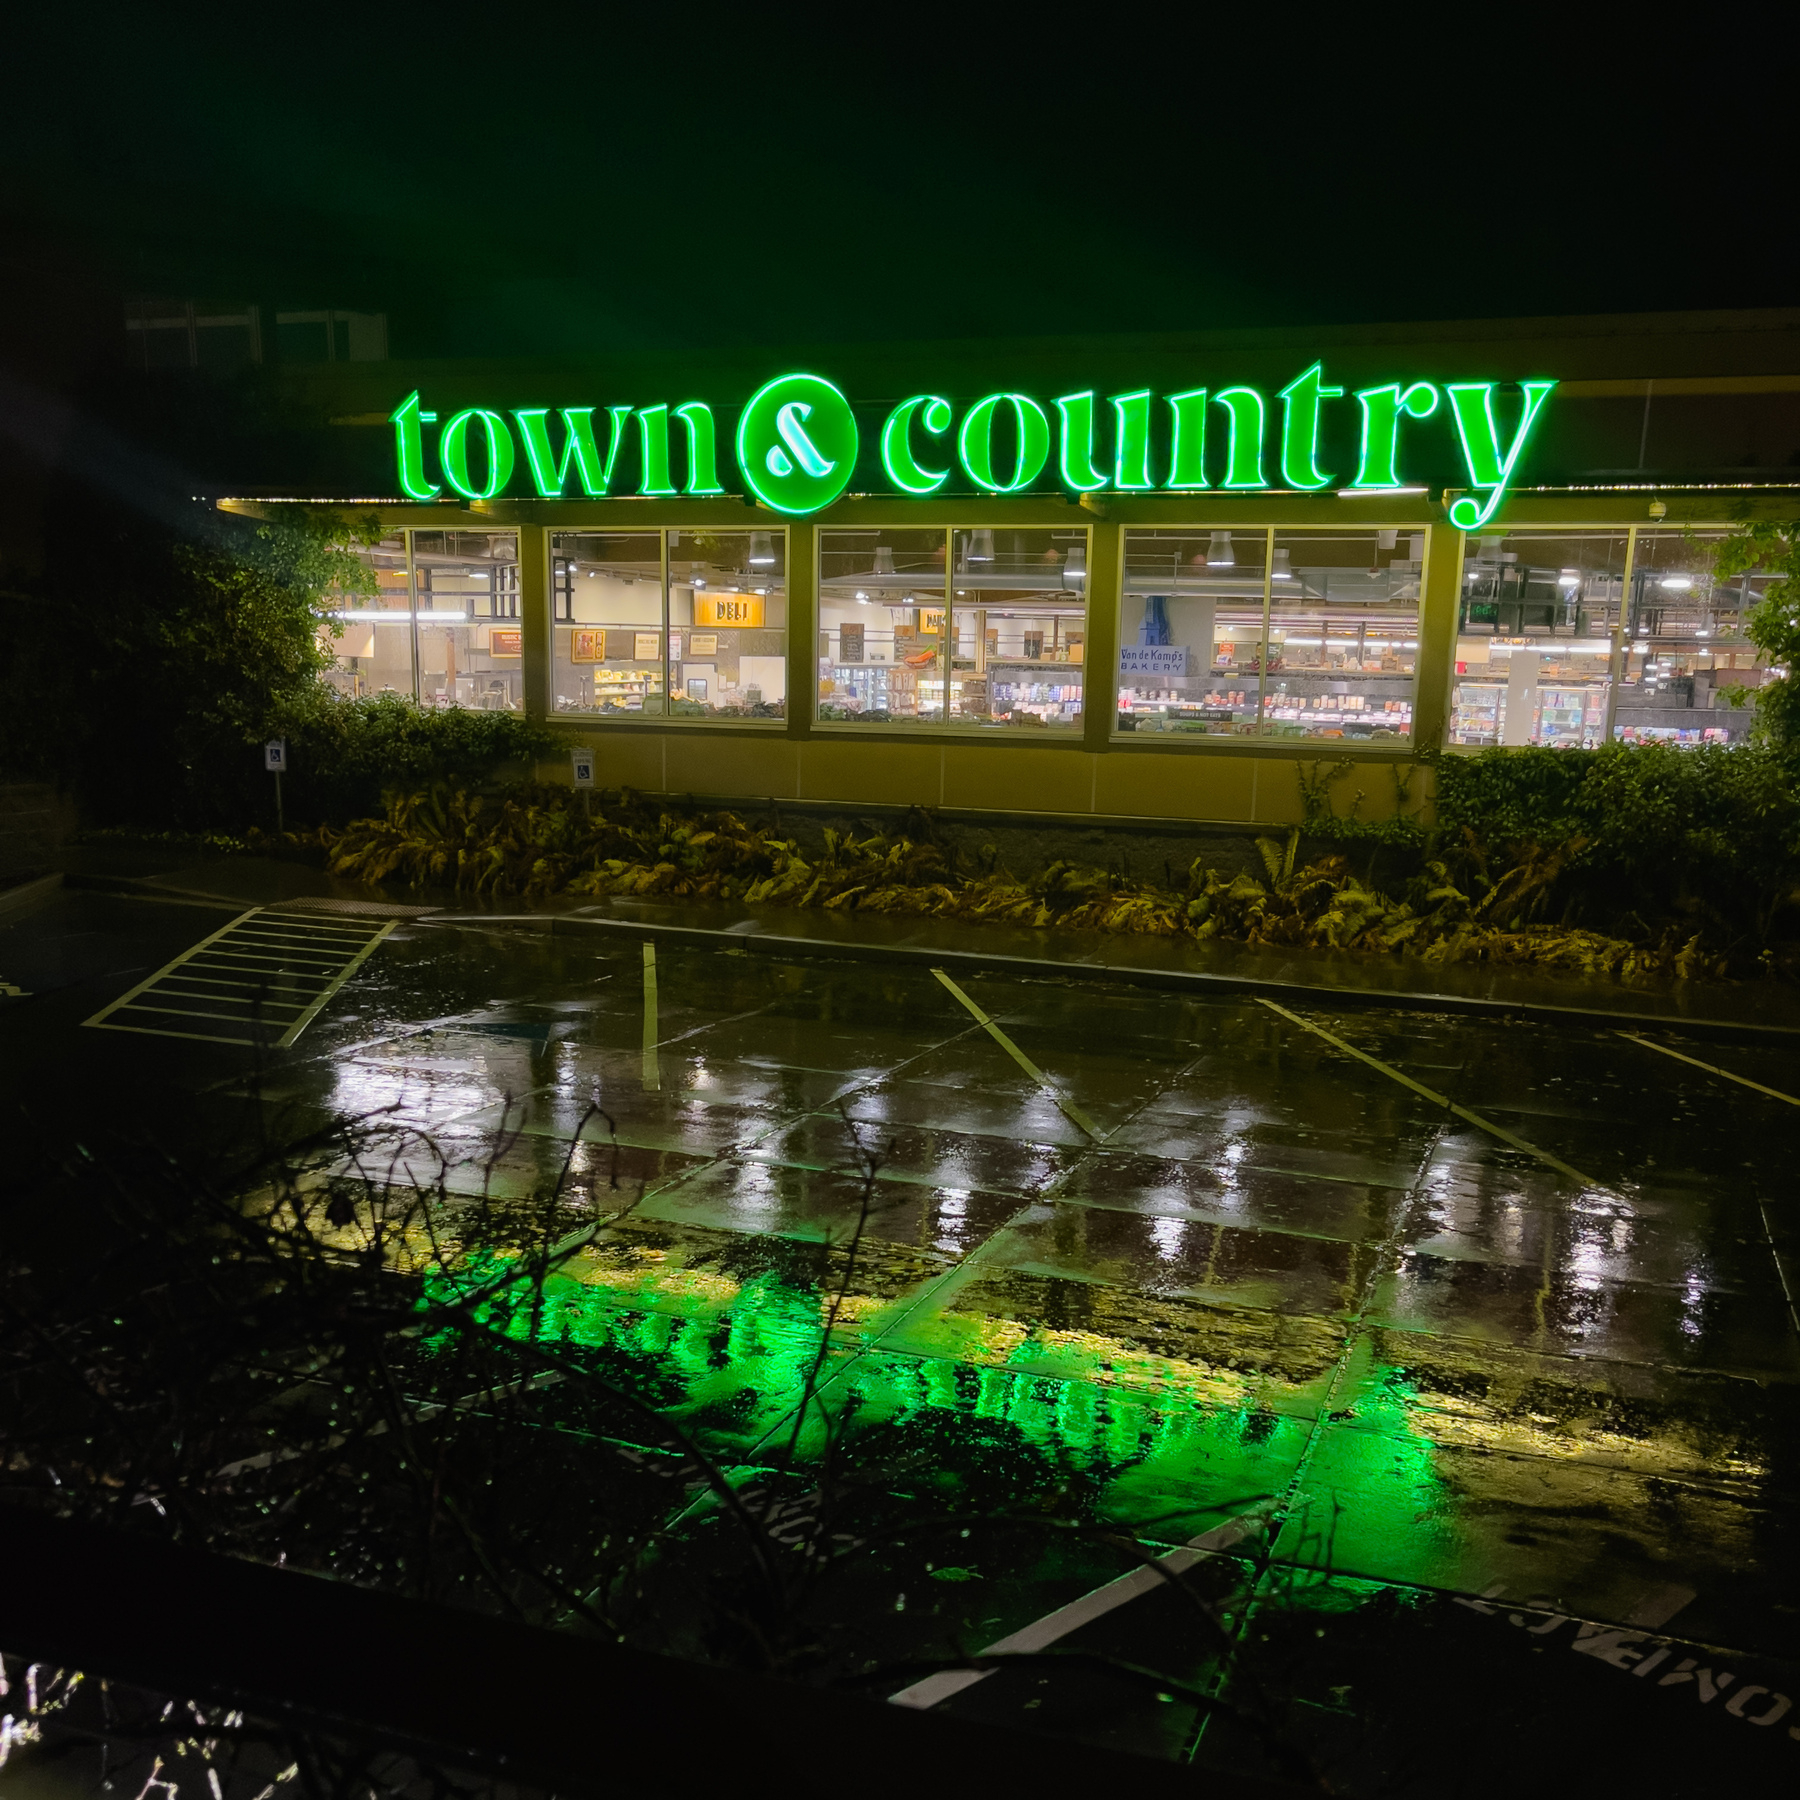 “Town &amp; Country” supermarket neon signage at night reflected in wet parking lot pavement below.